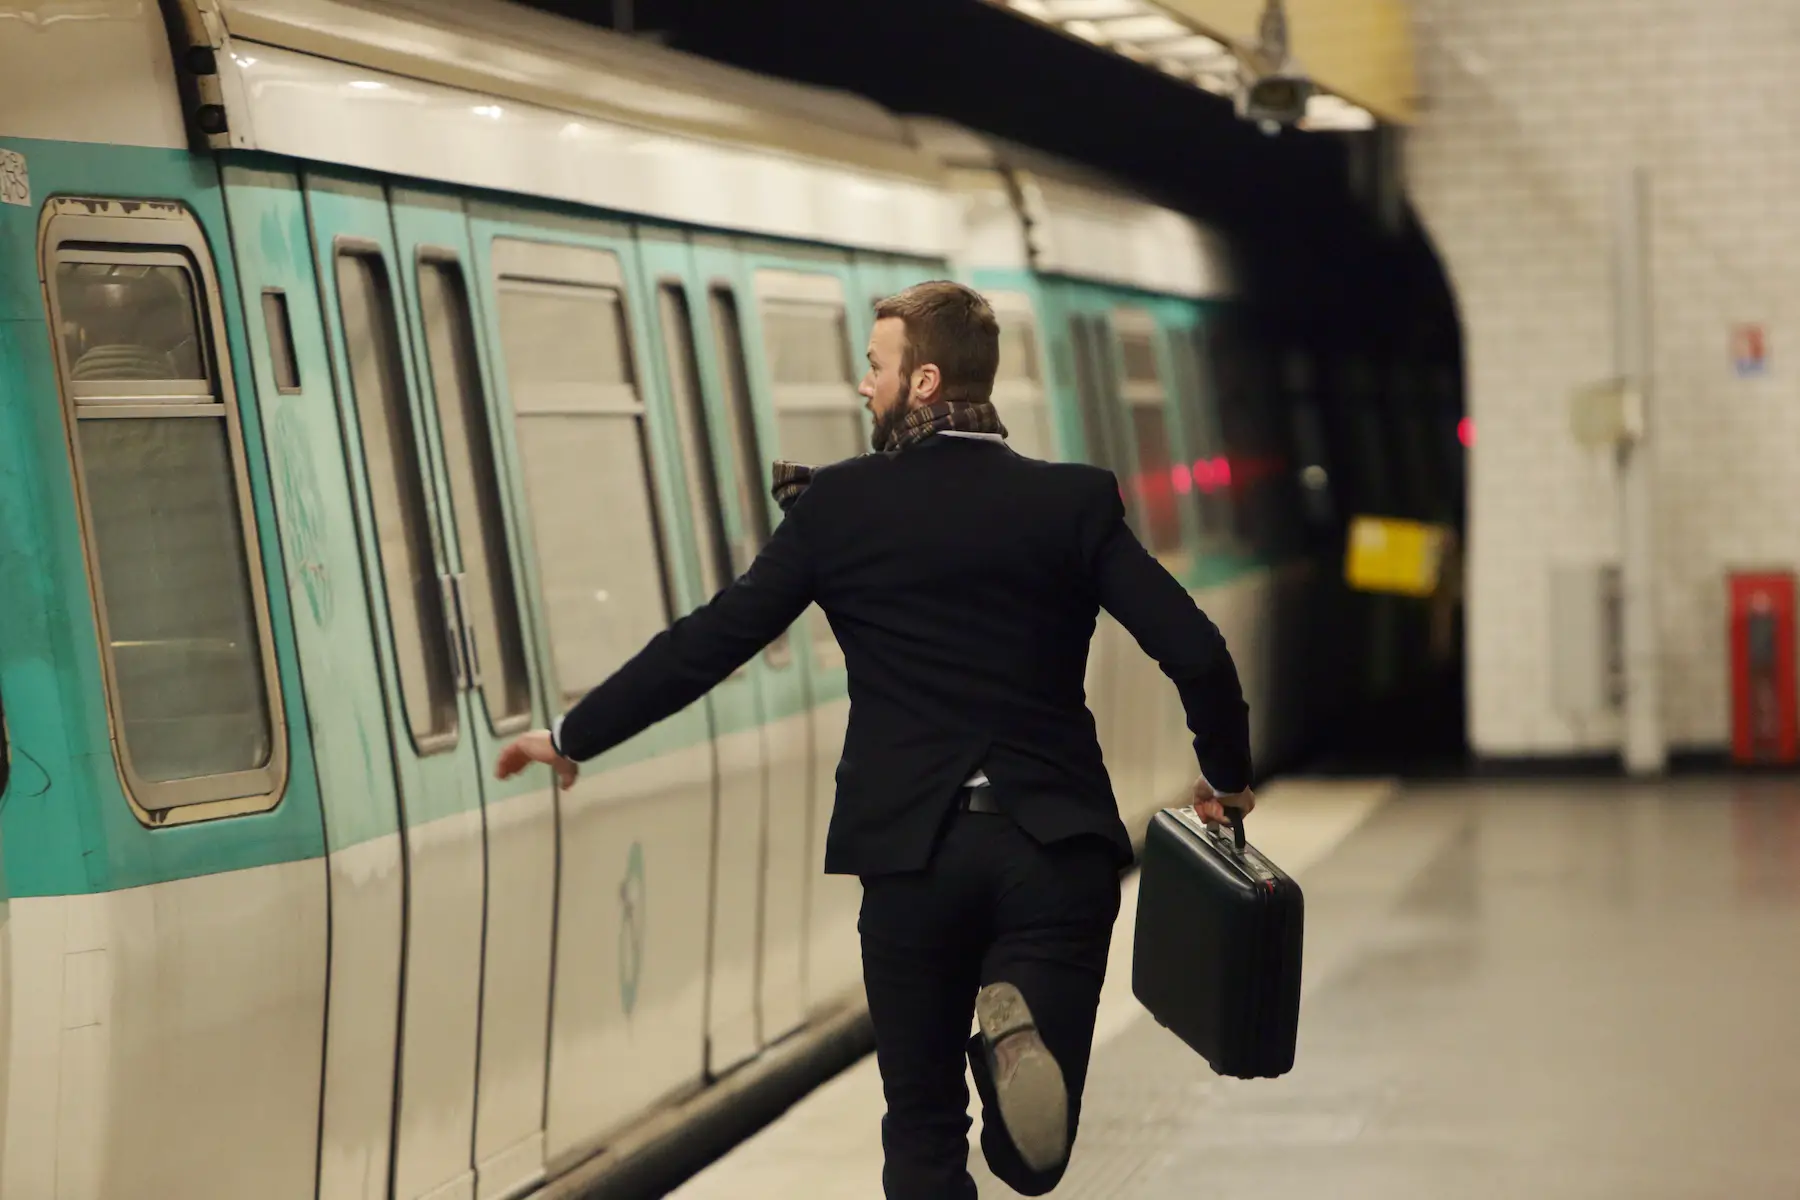 A man in a suit and carrying a briefcase runs to catch a Paris metro train as the doors are closing